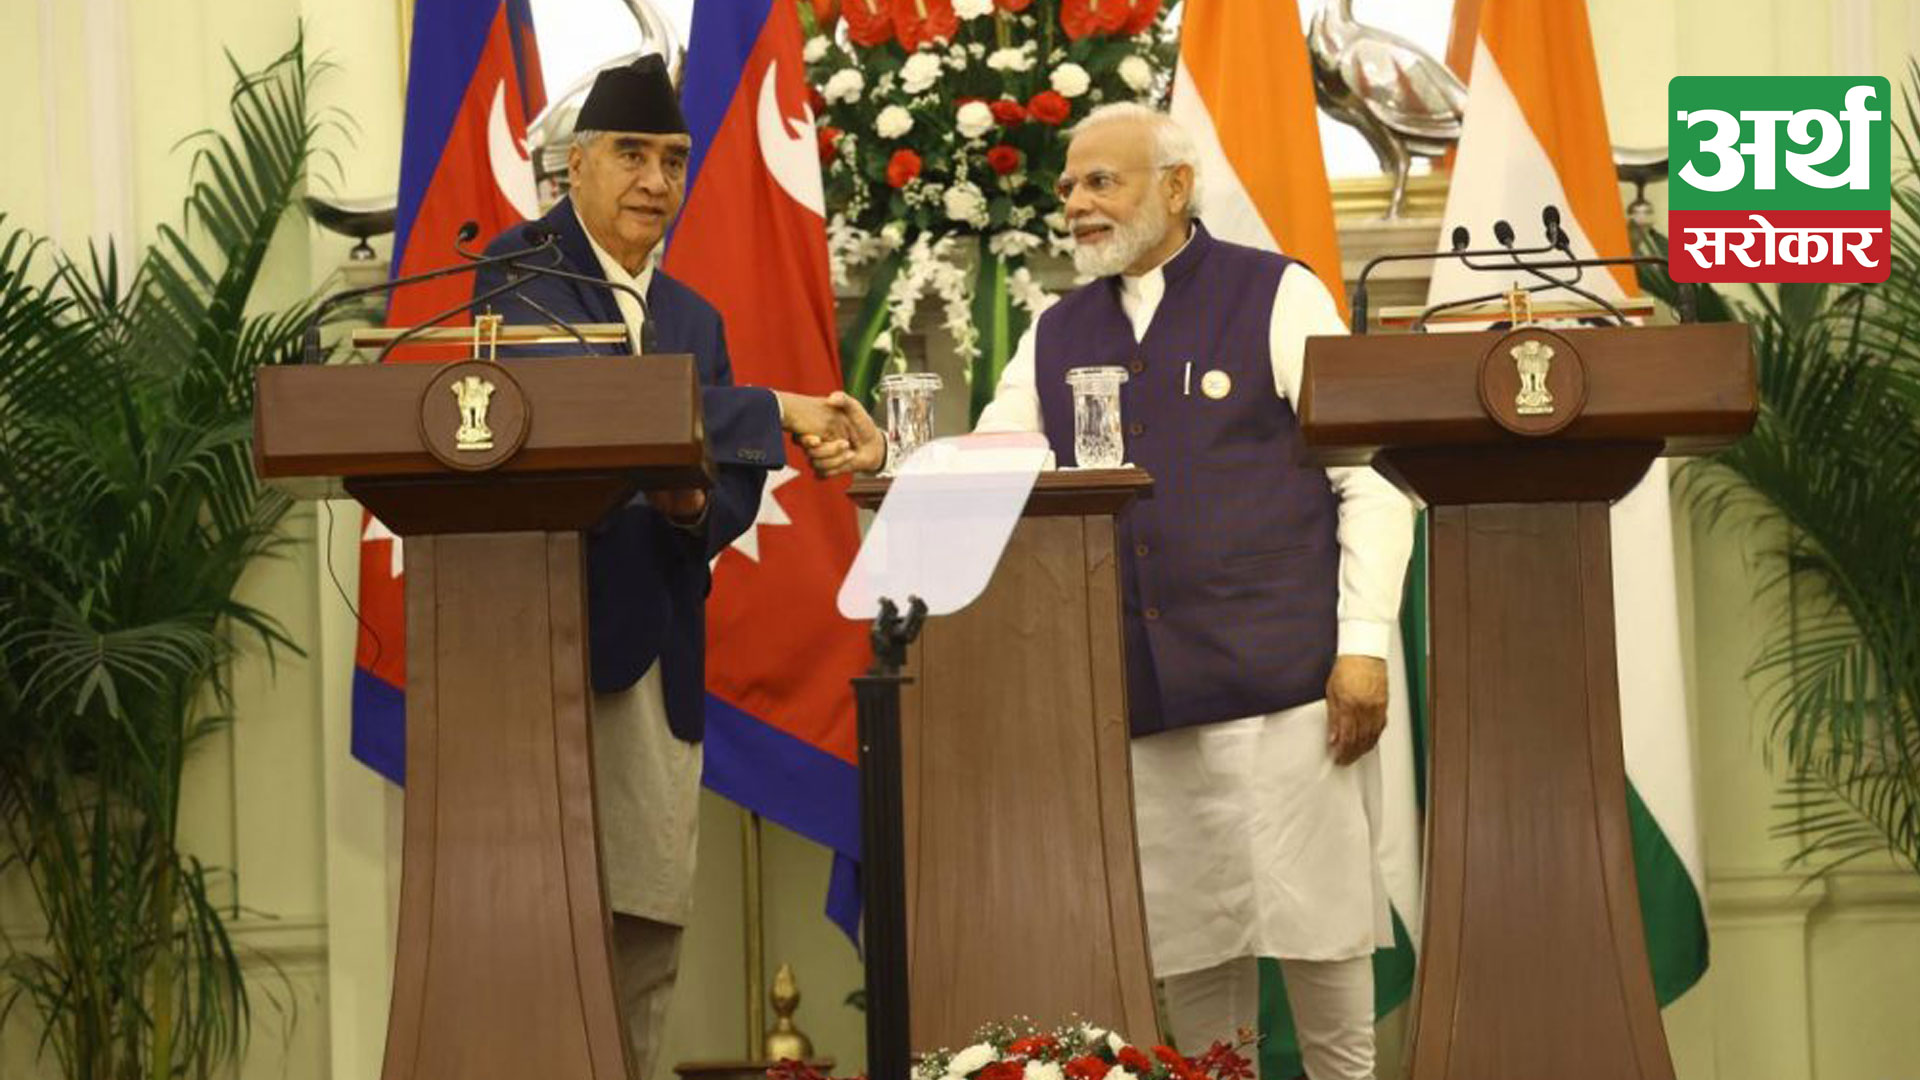 Prospects for power trade expanded with Nepal-India Common Vision in energy sector